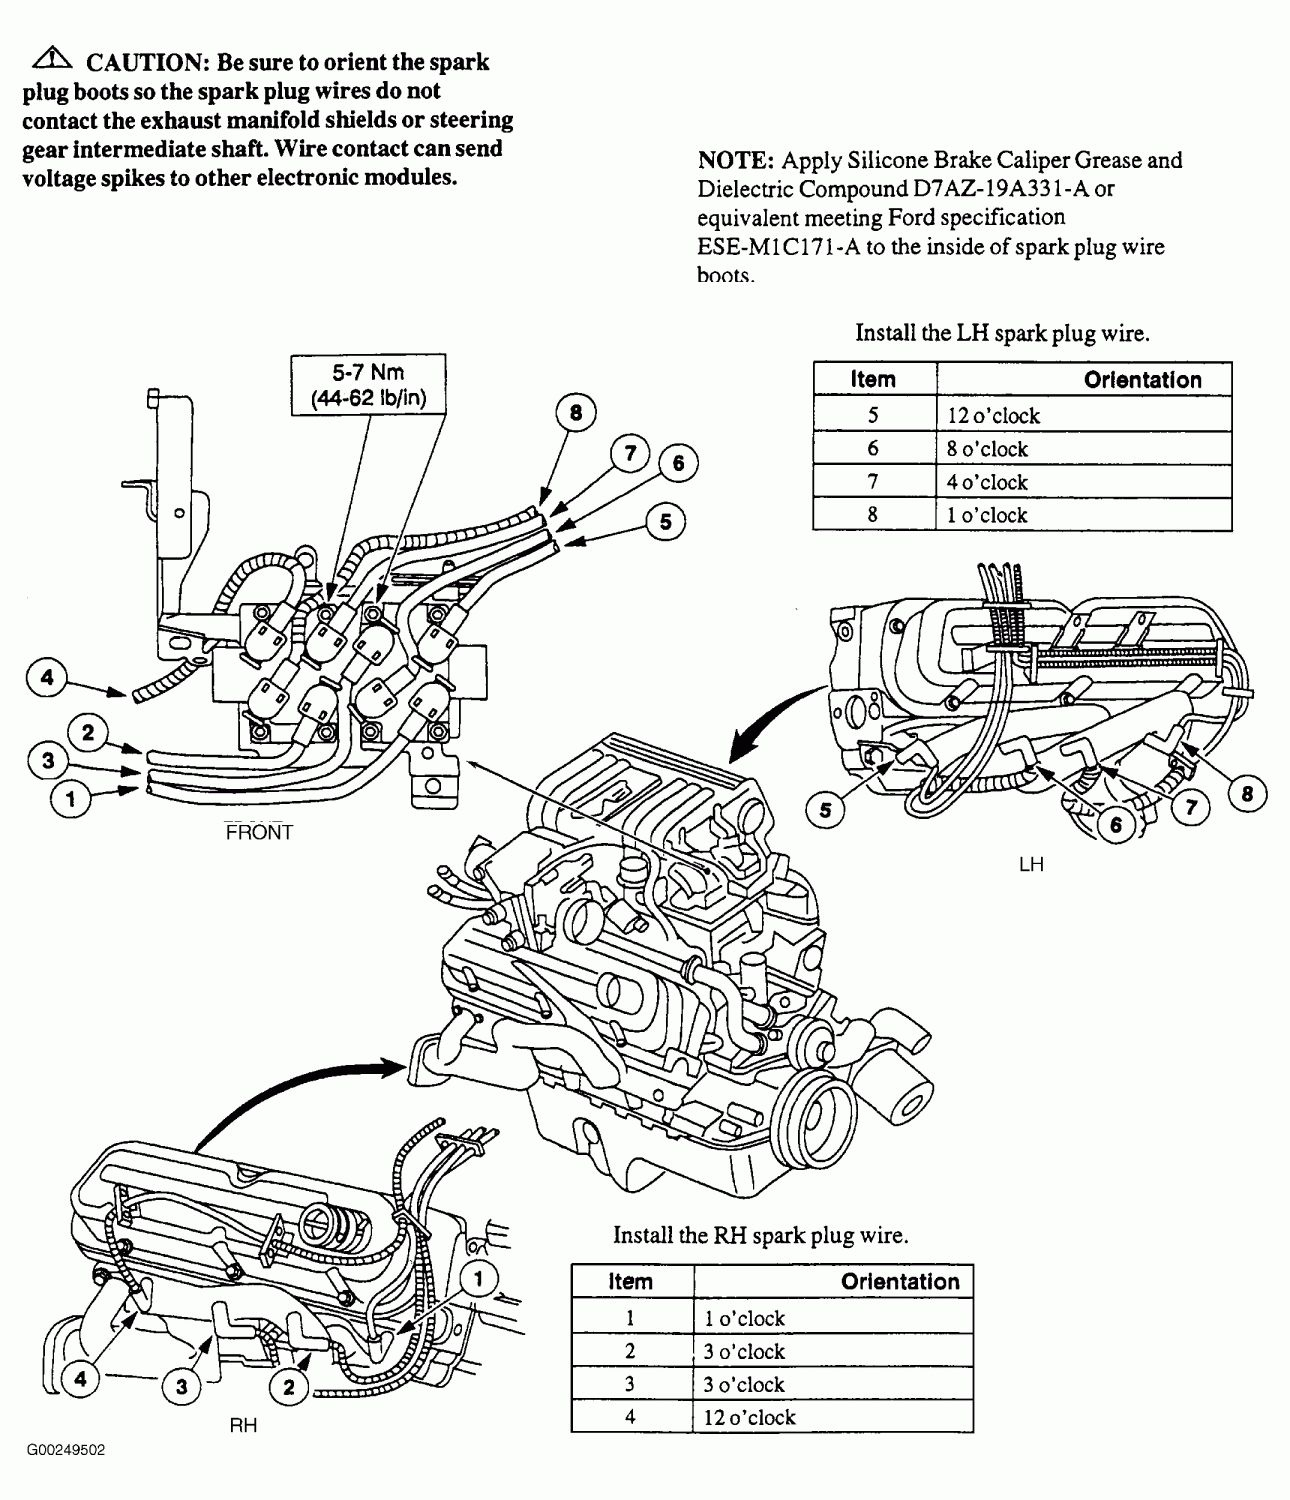 1996 Ford Explorer Engine Wiring Diagram And Firing Order